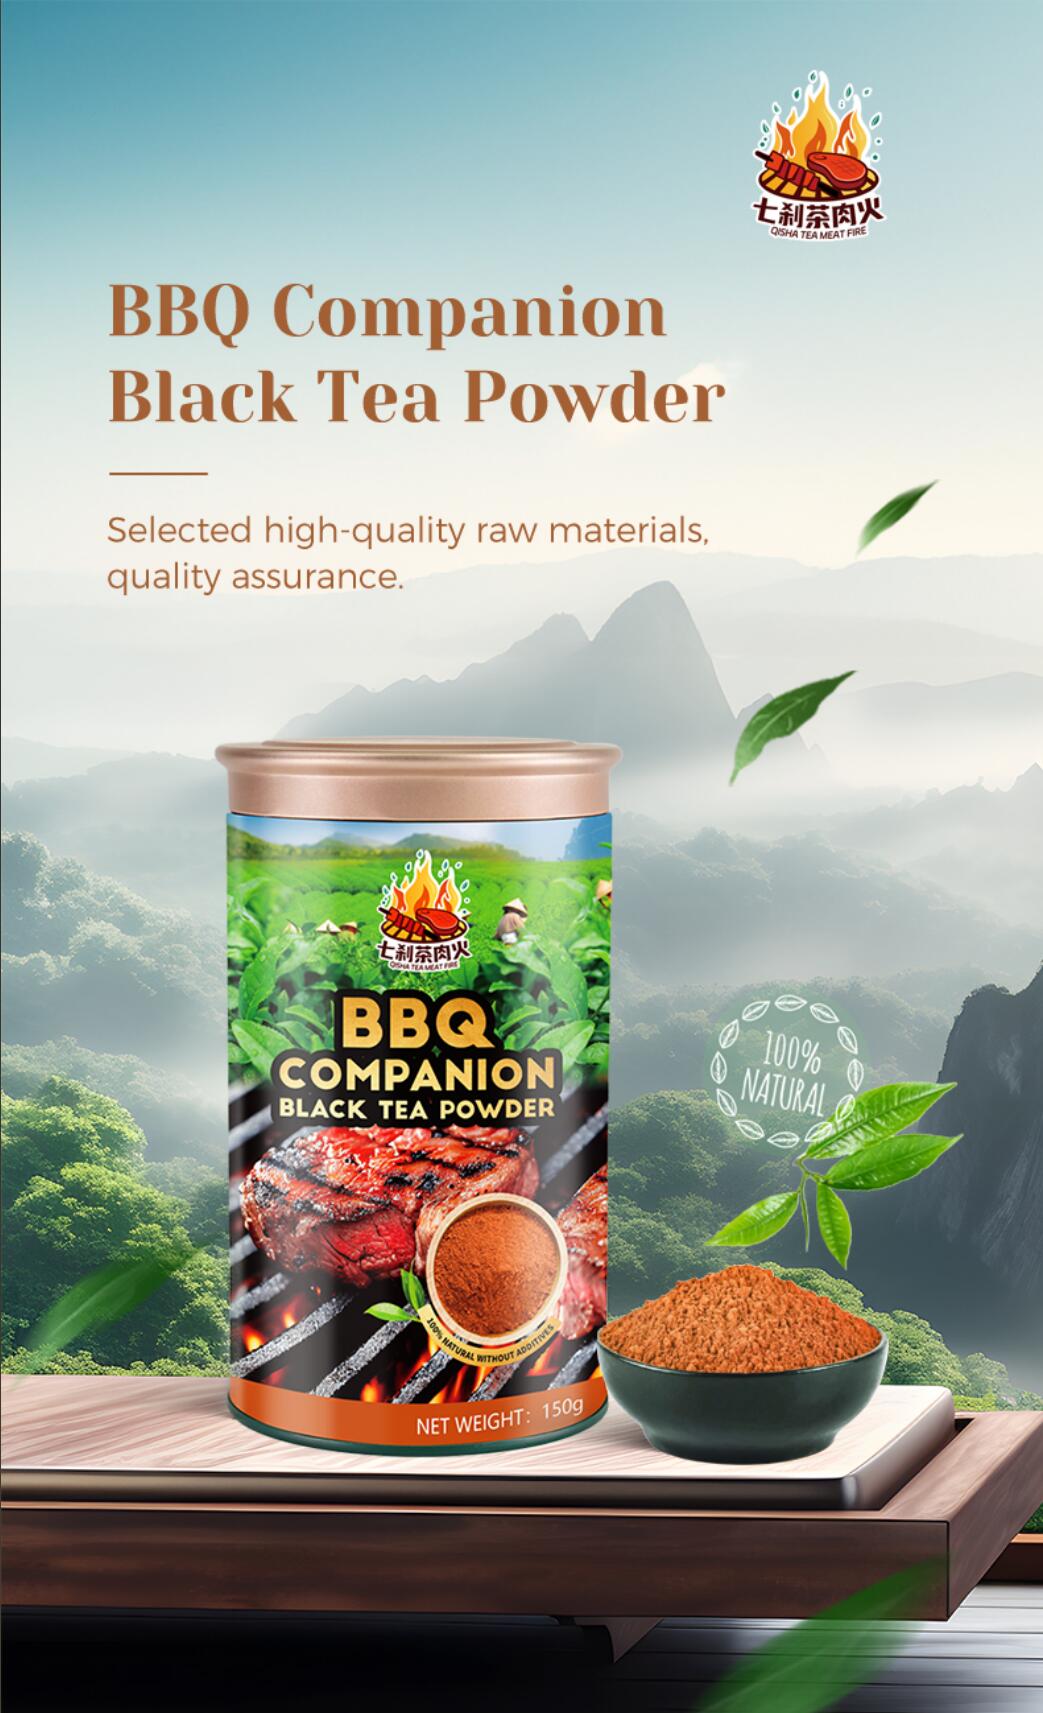 The soul mate of barbecue, the mysterious deliciousness of Chinese tea powder barbecue ingredients插图